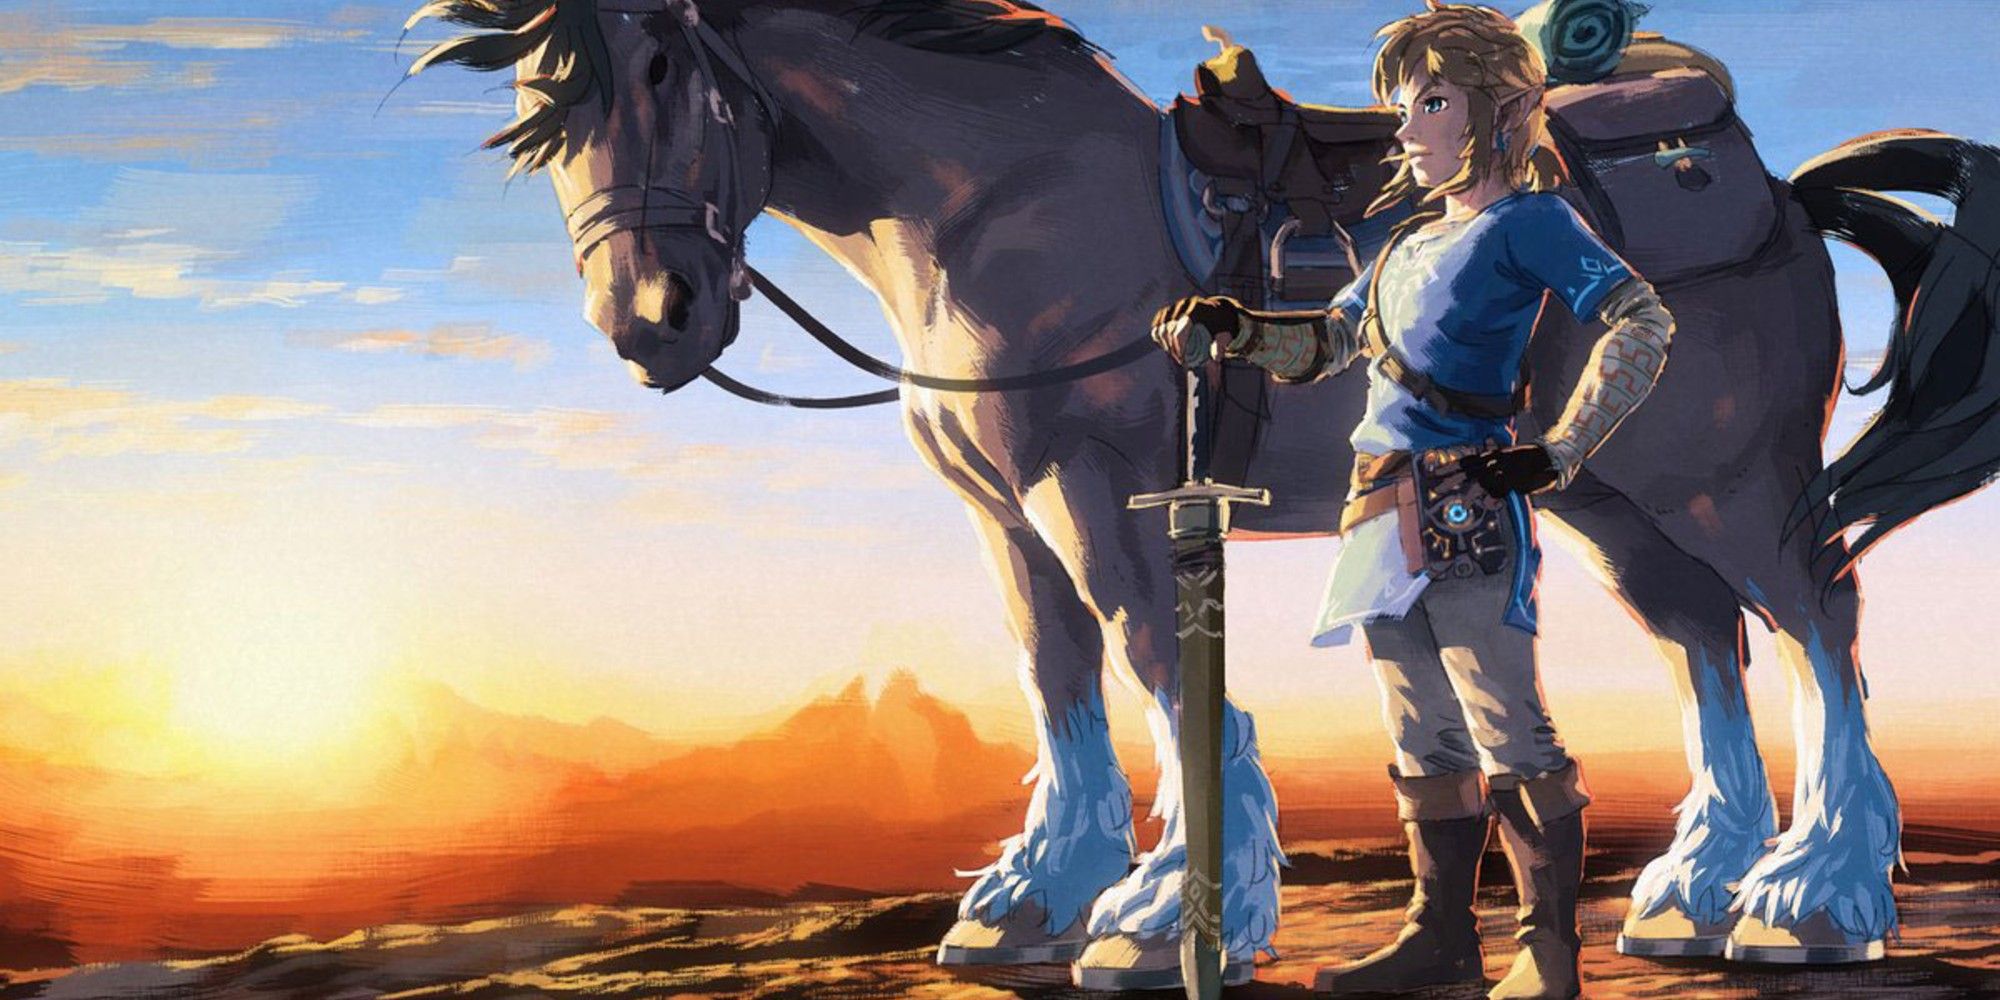 Horses and Mounts - The Legend of Zelda: Breath of the Wild Guide - IGN